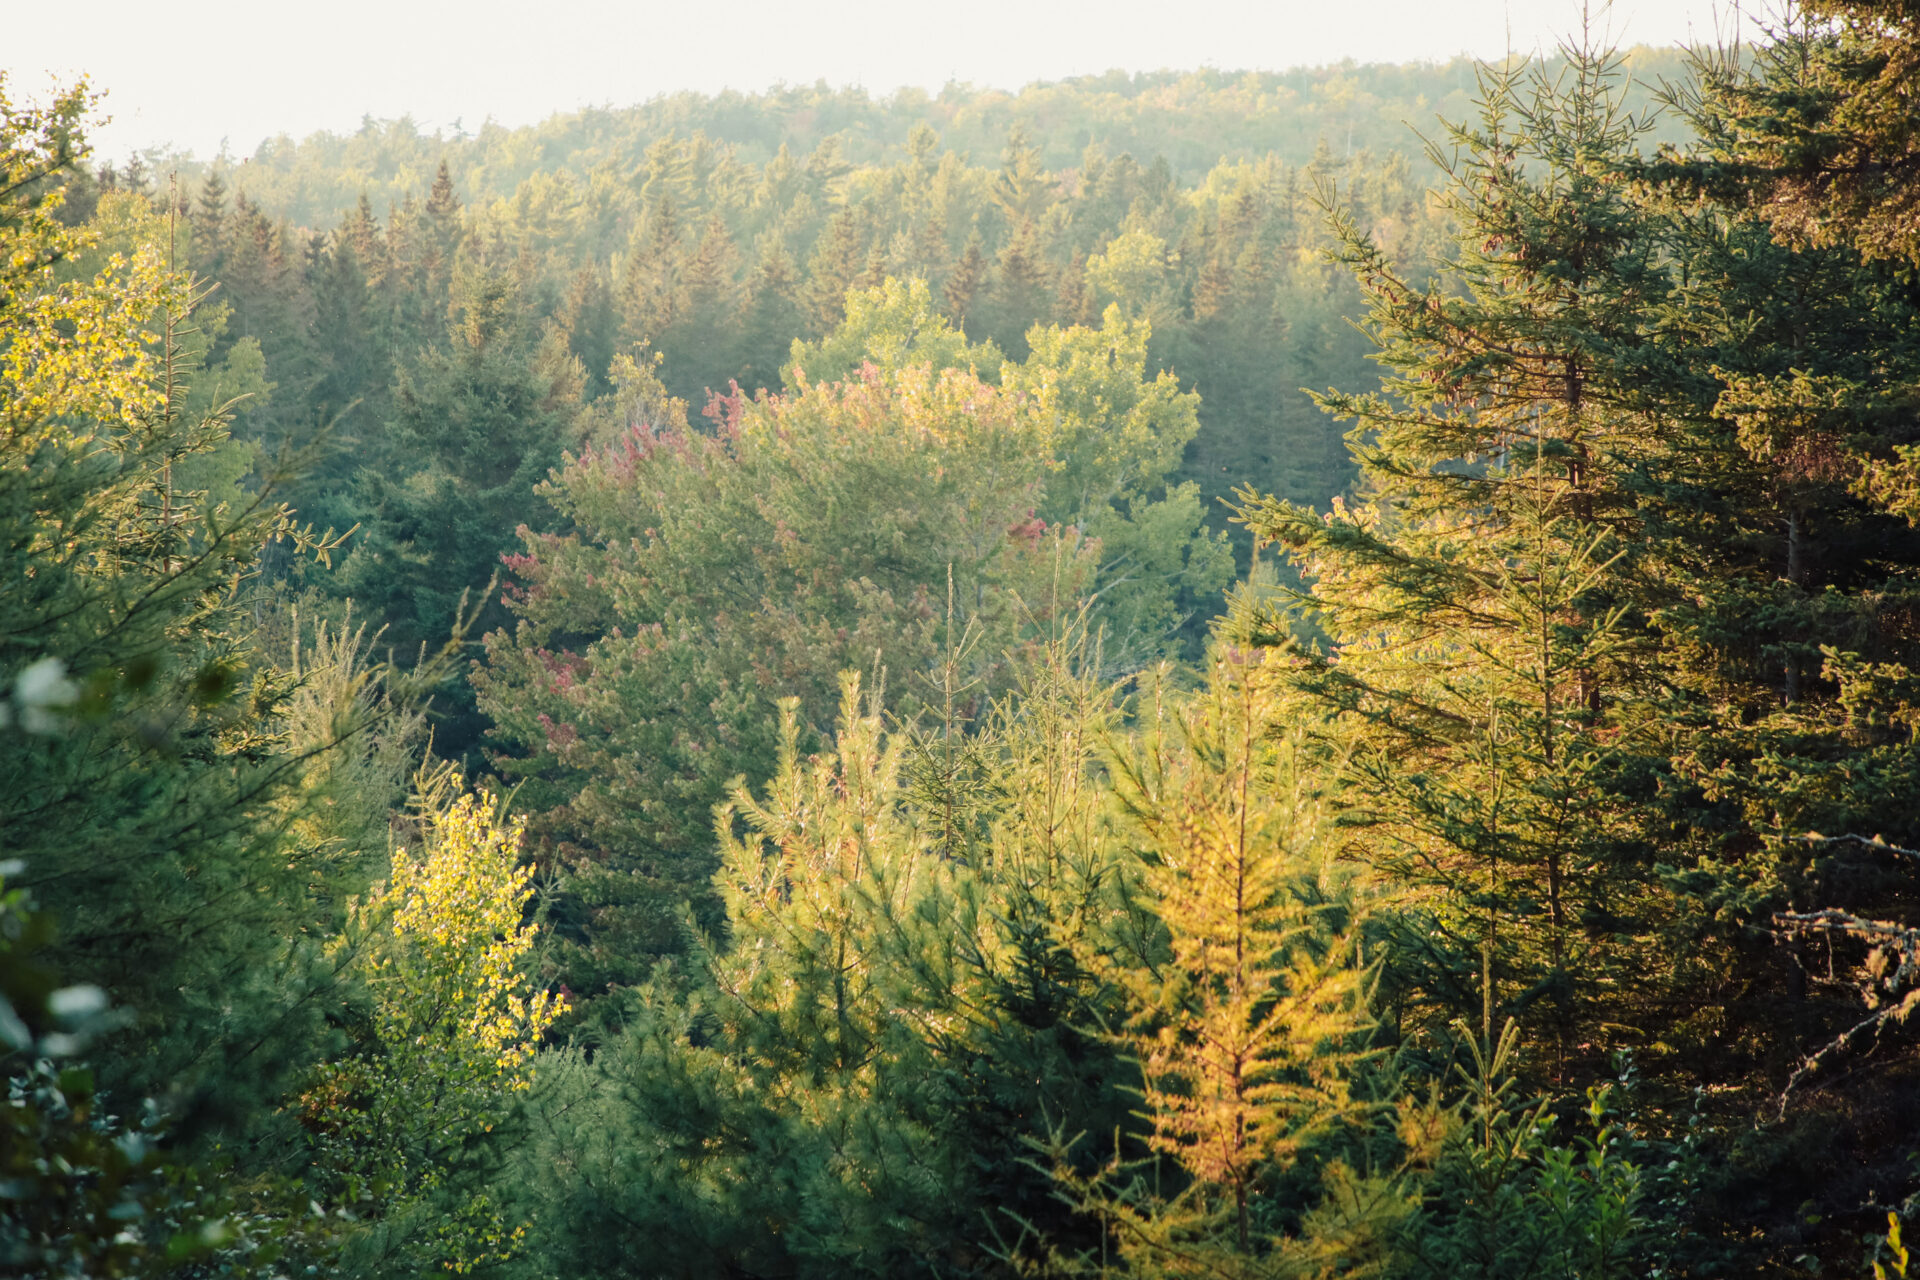 Evergreen trees in various colours of green, yellow, and orange